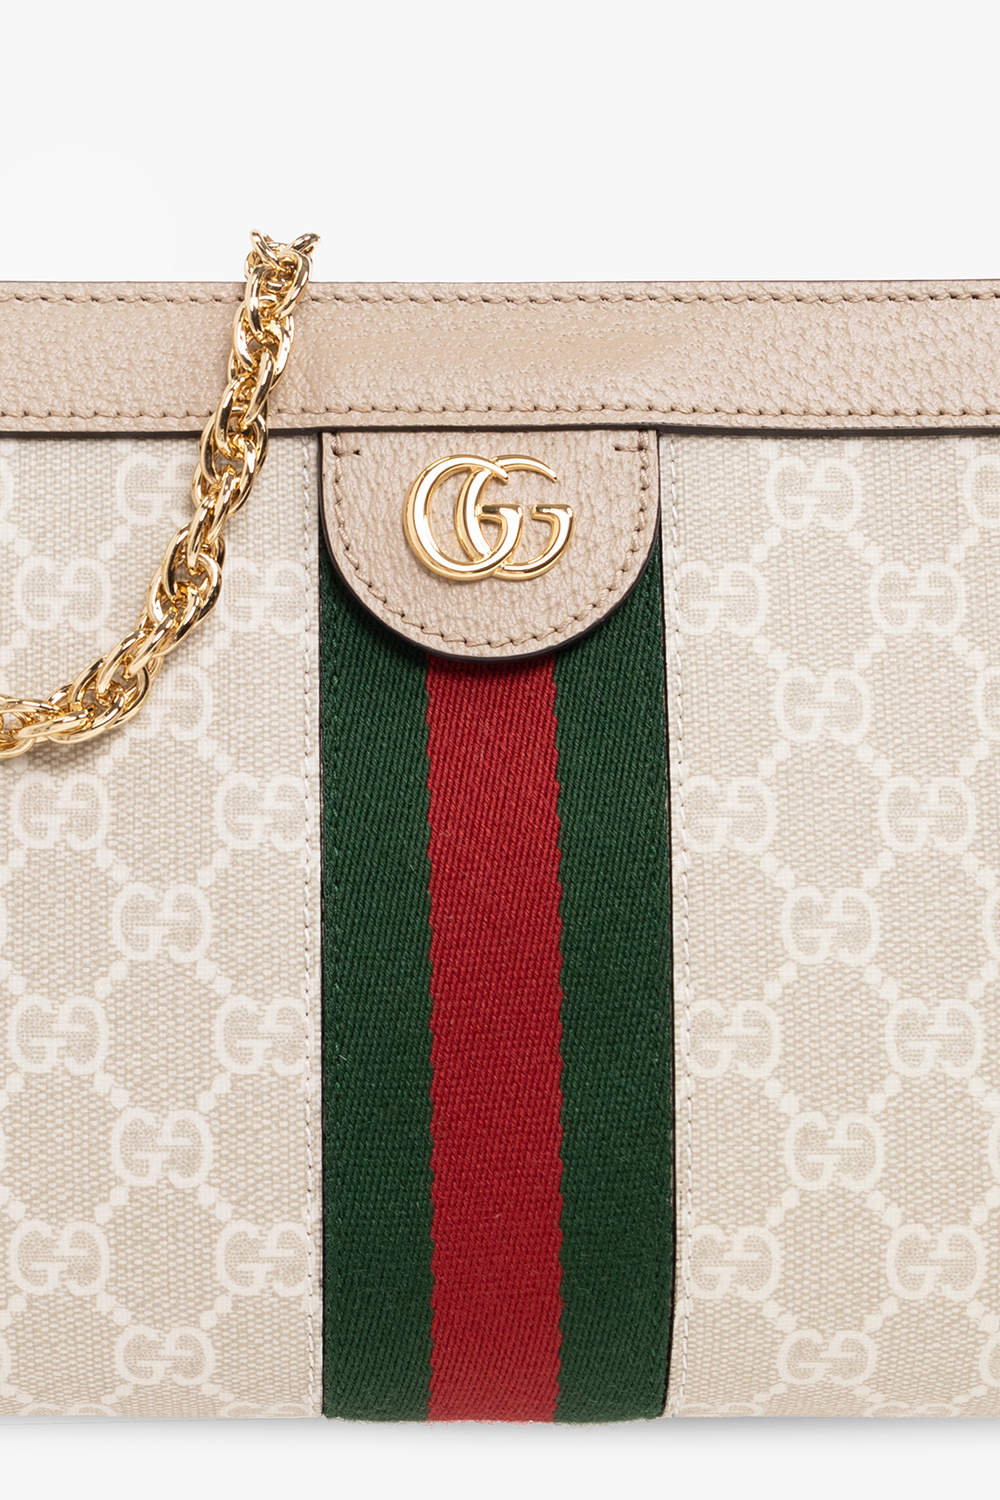 Gucci Dionysus Shoulder Bag Small Blue/Red Web Dark Green/Brown in  Wool/Leather with Palladium-tone - US